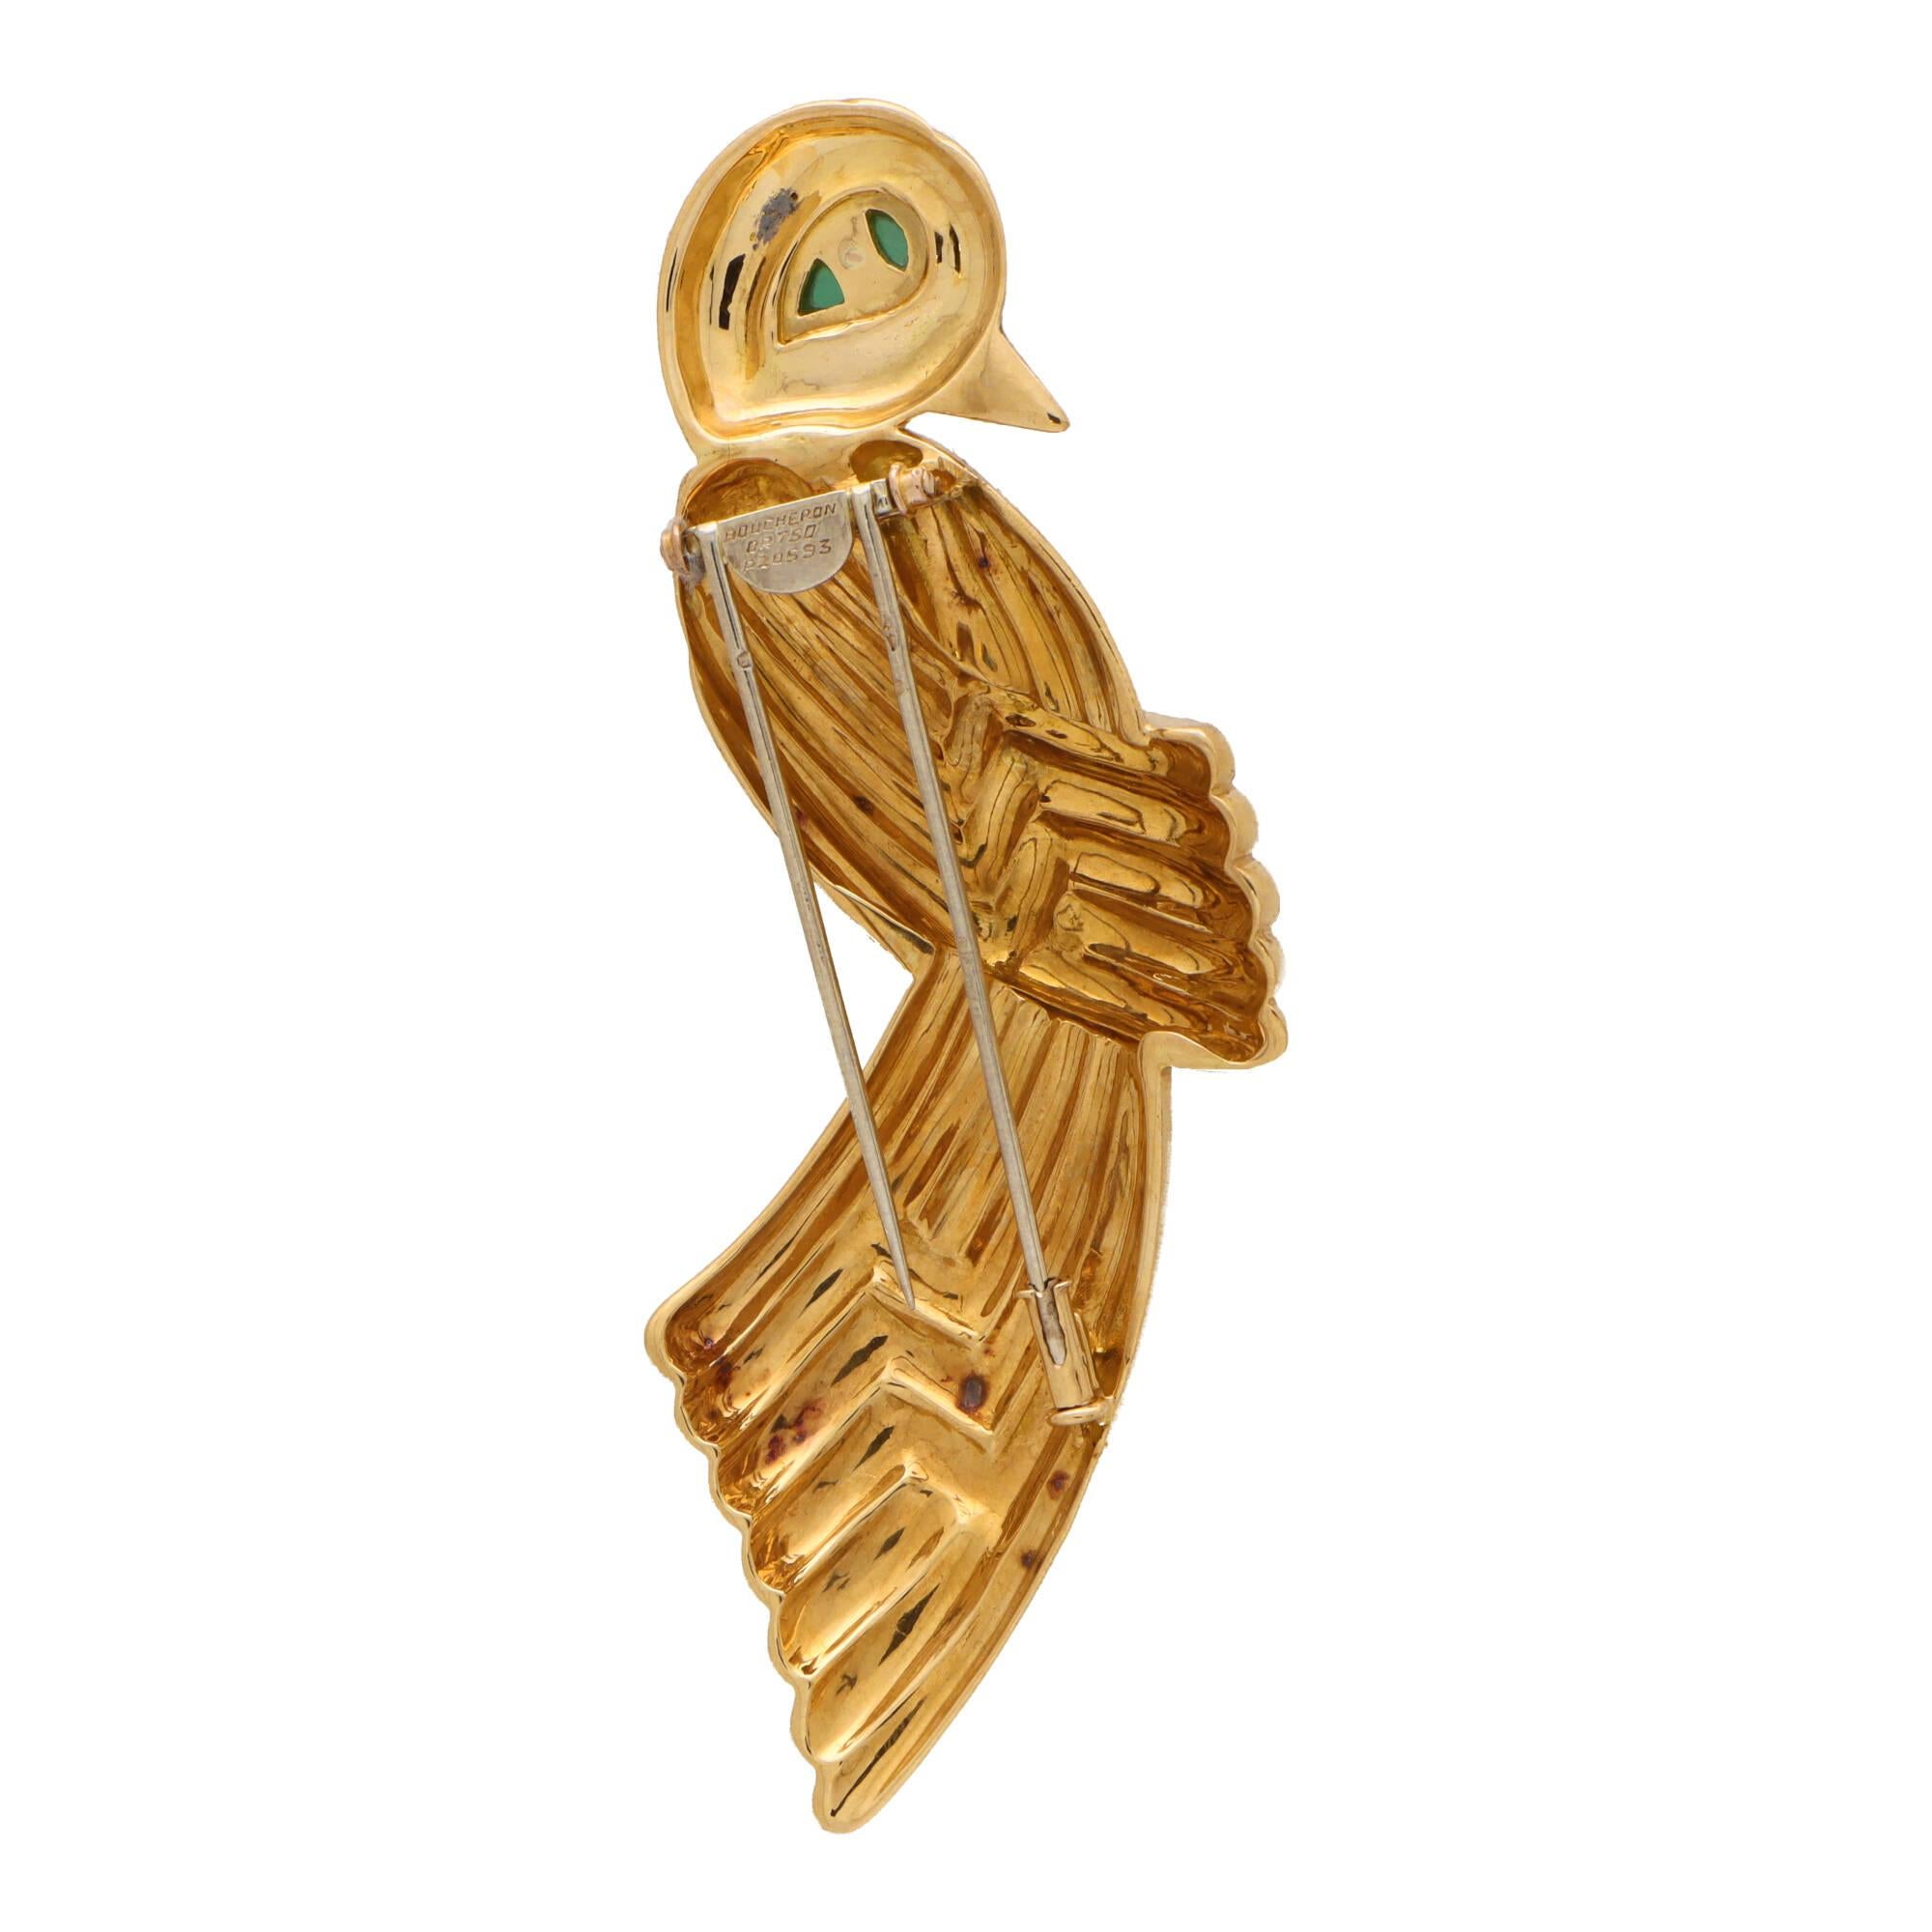 A beautiful early 1980’s Boucheron bird brooch set in 18k yellow gold.

This striking design depicts a perching bird and is composed of panels of polished yellow gold. The grooves in the body of the bird are magnificent and create a beautiful effect